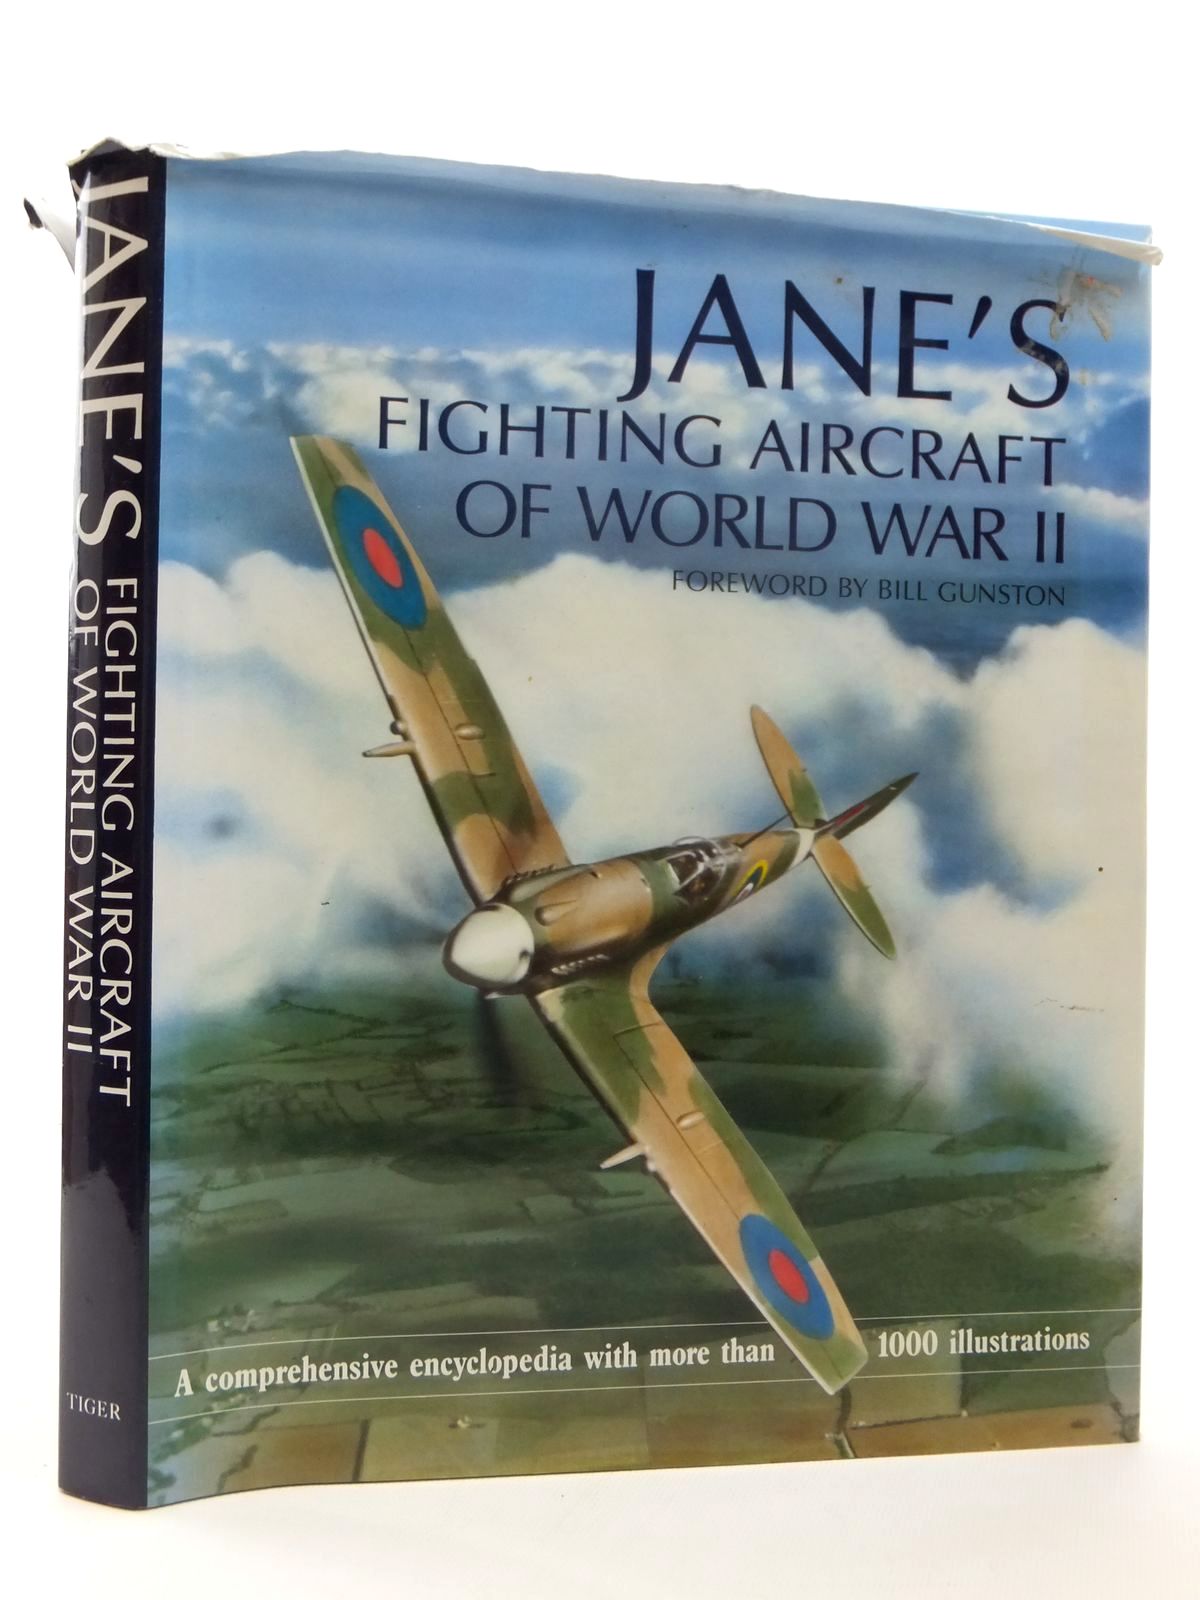 Stella & Rose's Books JANE'S ALL THE WORLD'S AIRCRAFT 1919 Written By Grey, C.G., STOCK CODE